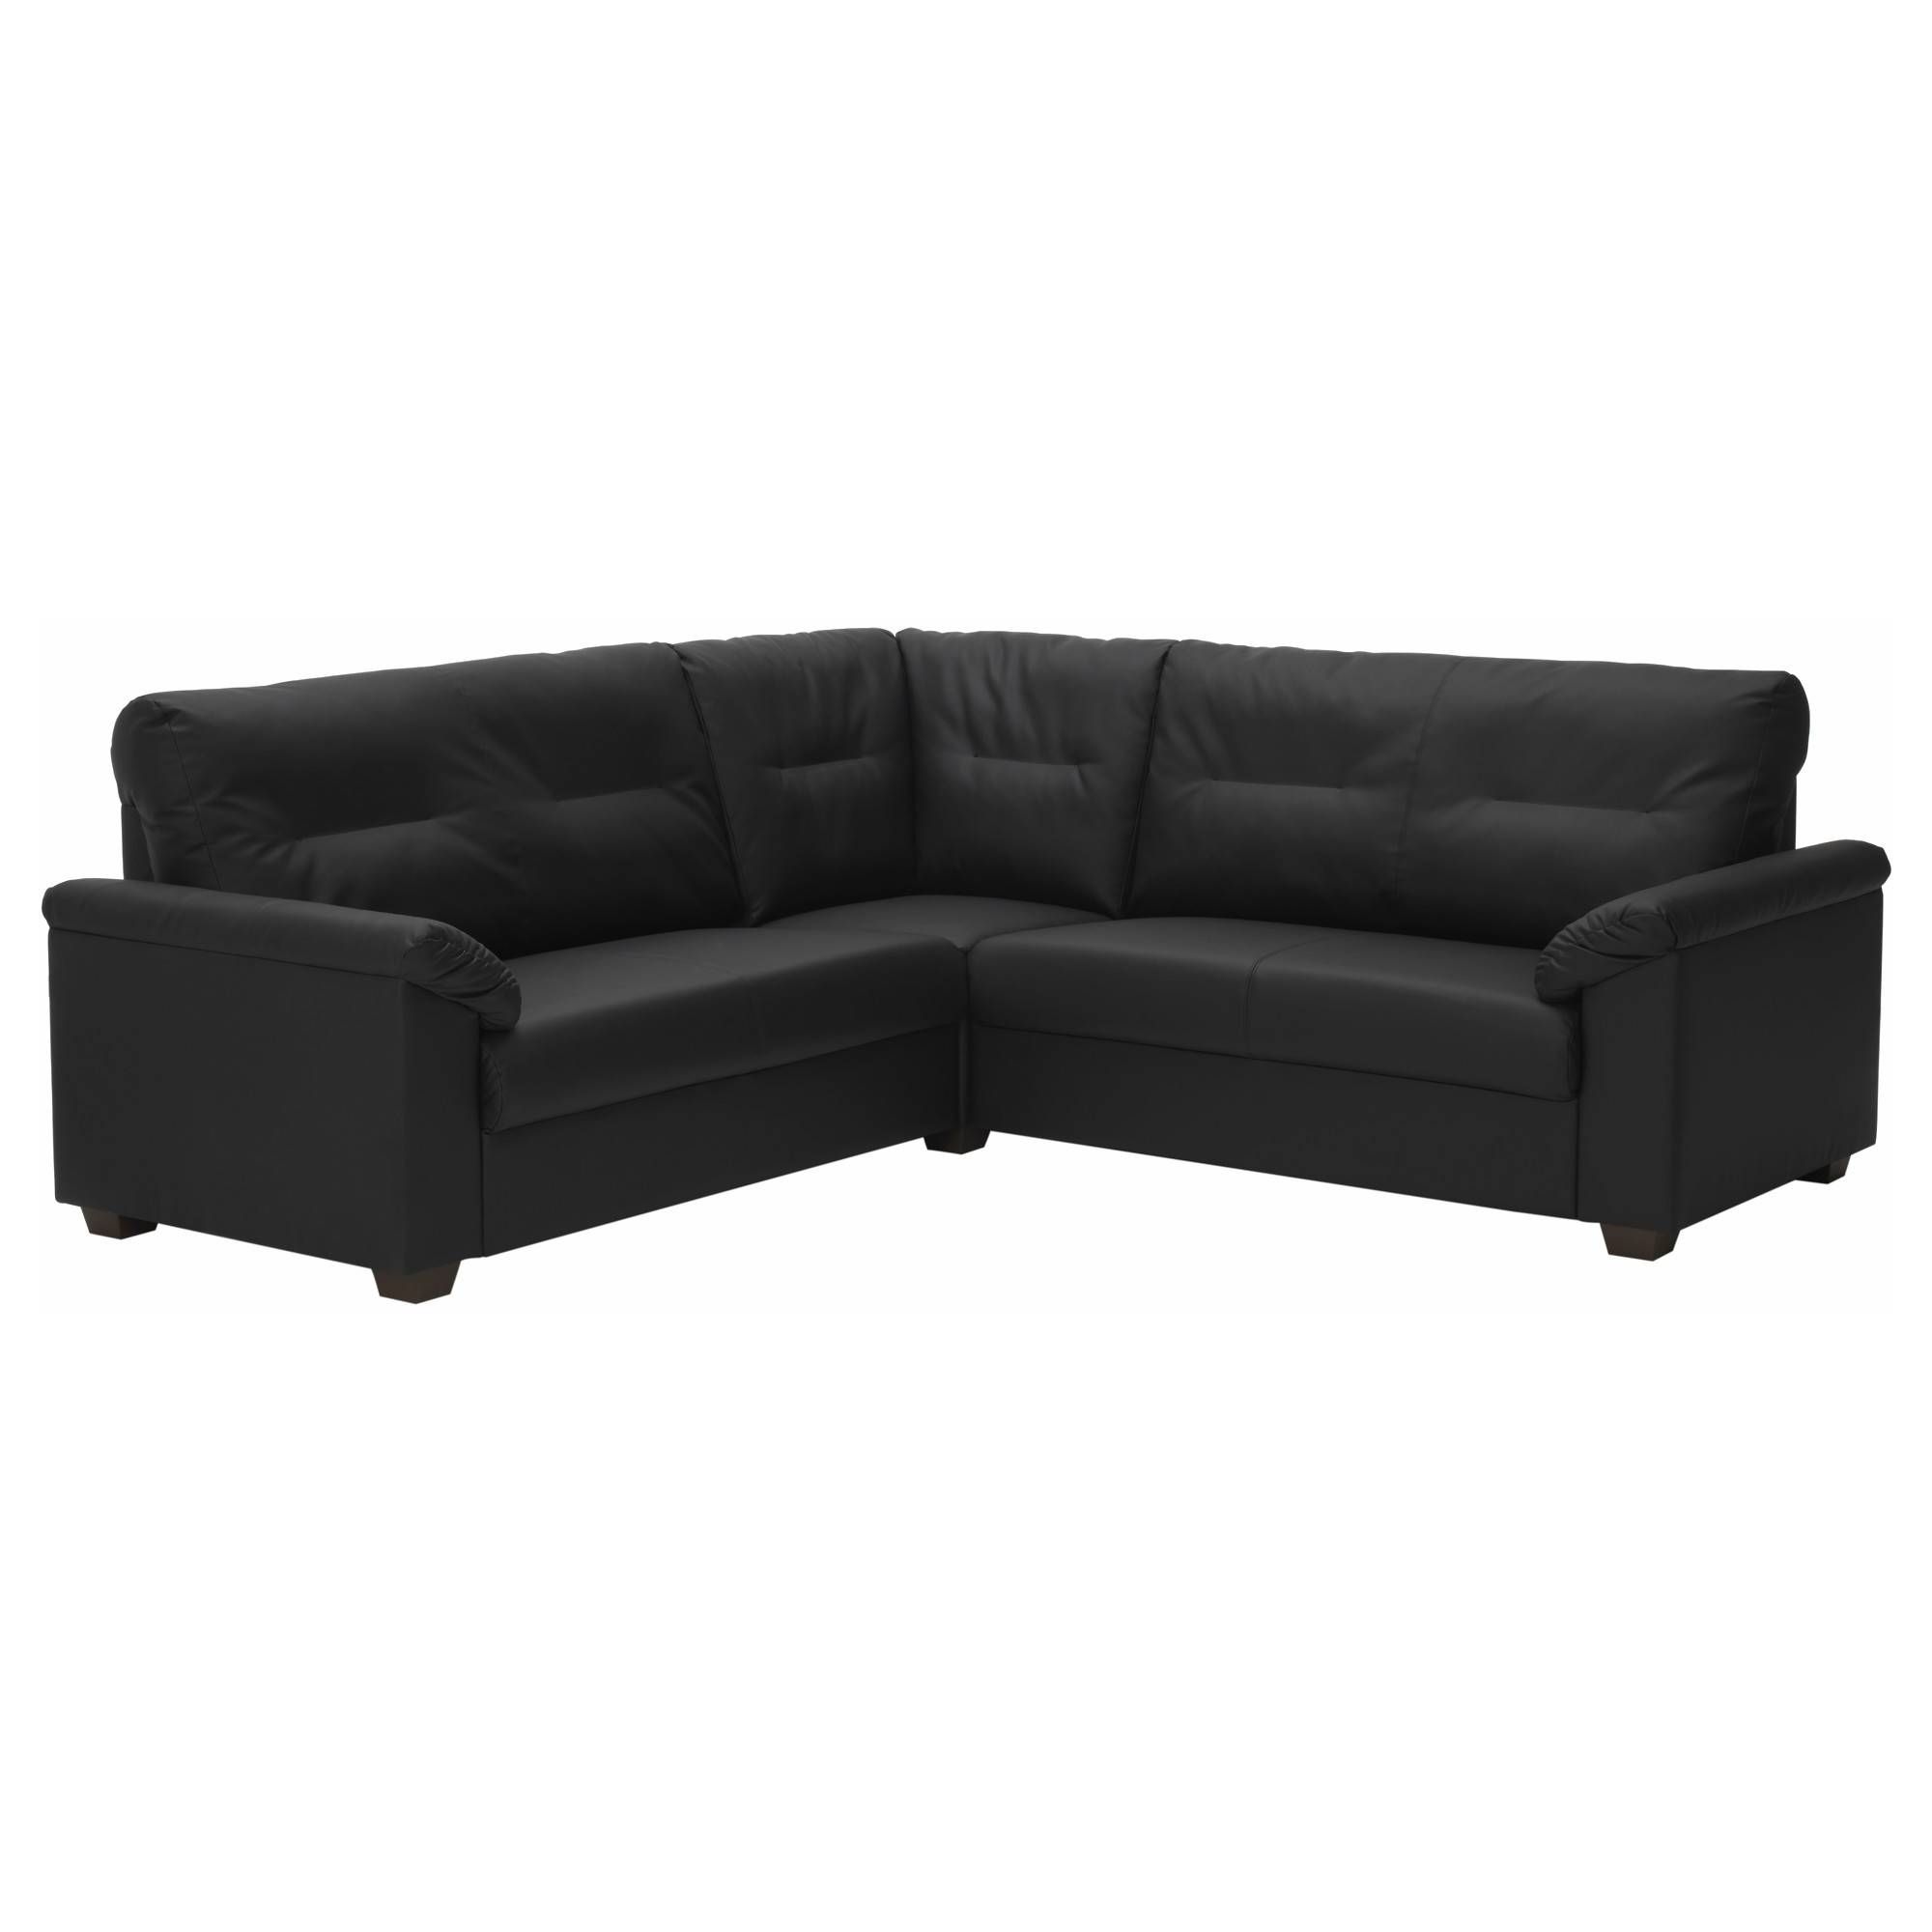 Sectional Sofa Leather Ikea | Tehranmix Decoration For 45 Degree Sectional Sofa (View 18 of 30)